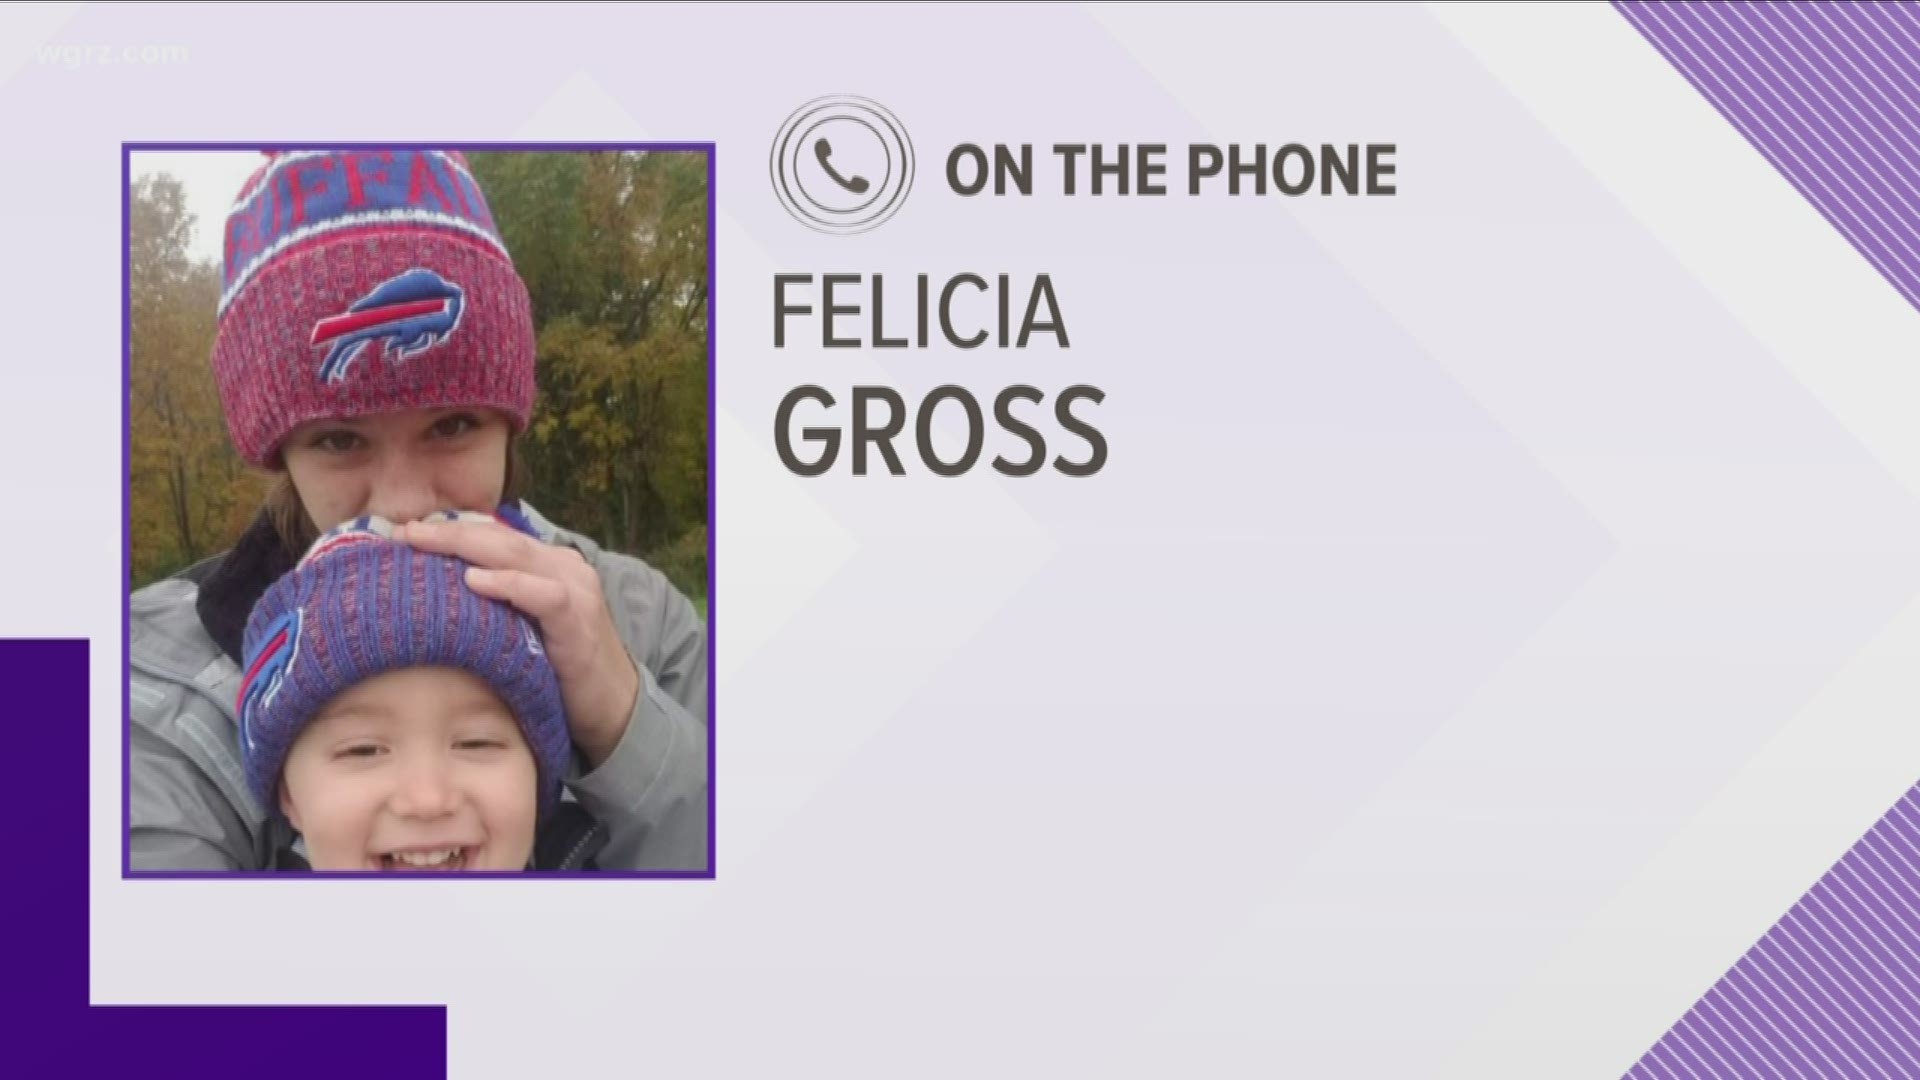 LeShawn Jerman lives in North Carolina and sent out a tweet offering a fellow fan a chance to win a pair of season tickets by simply retweeting him. Felicia Gross and her 4 year old son Gavin, who she calls Rico won.